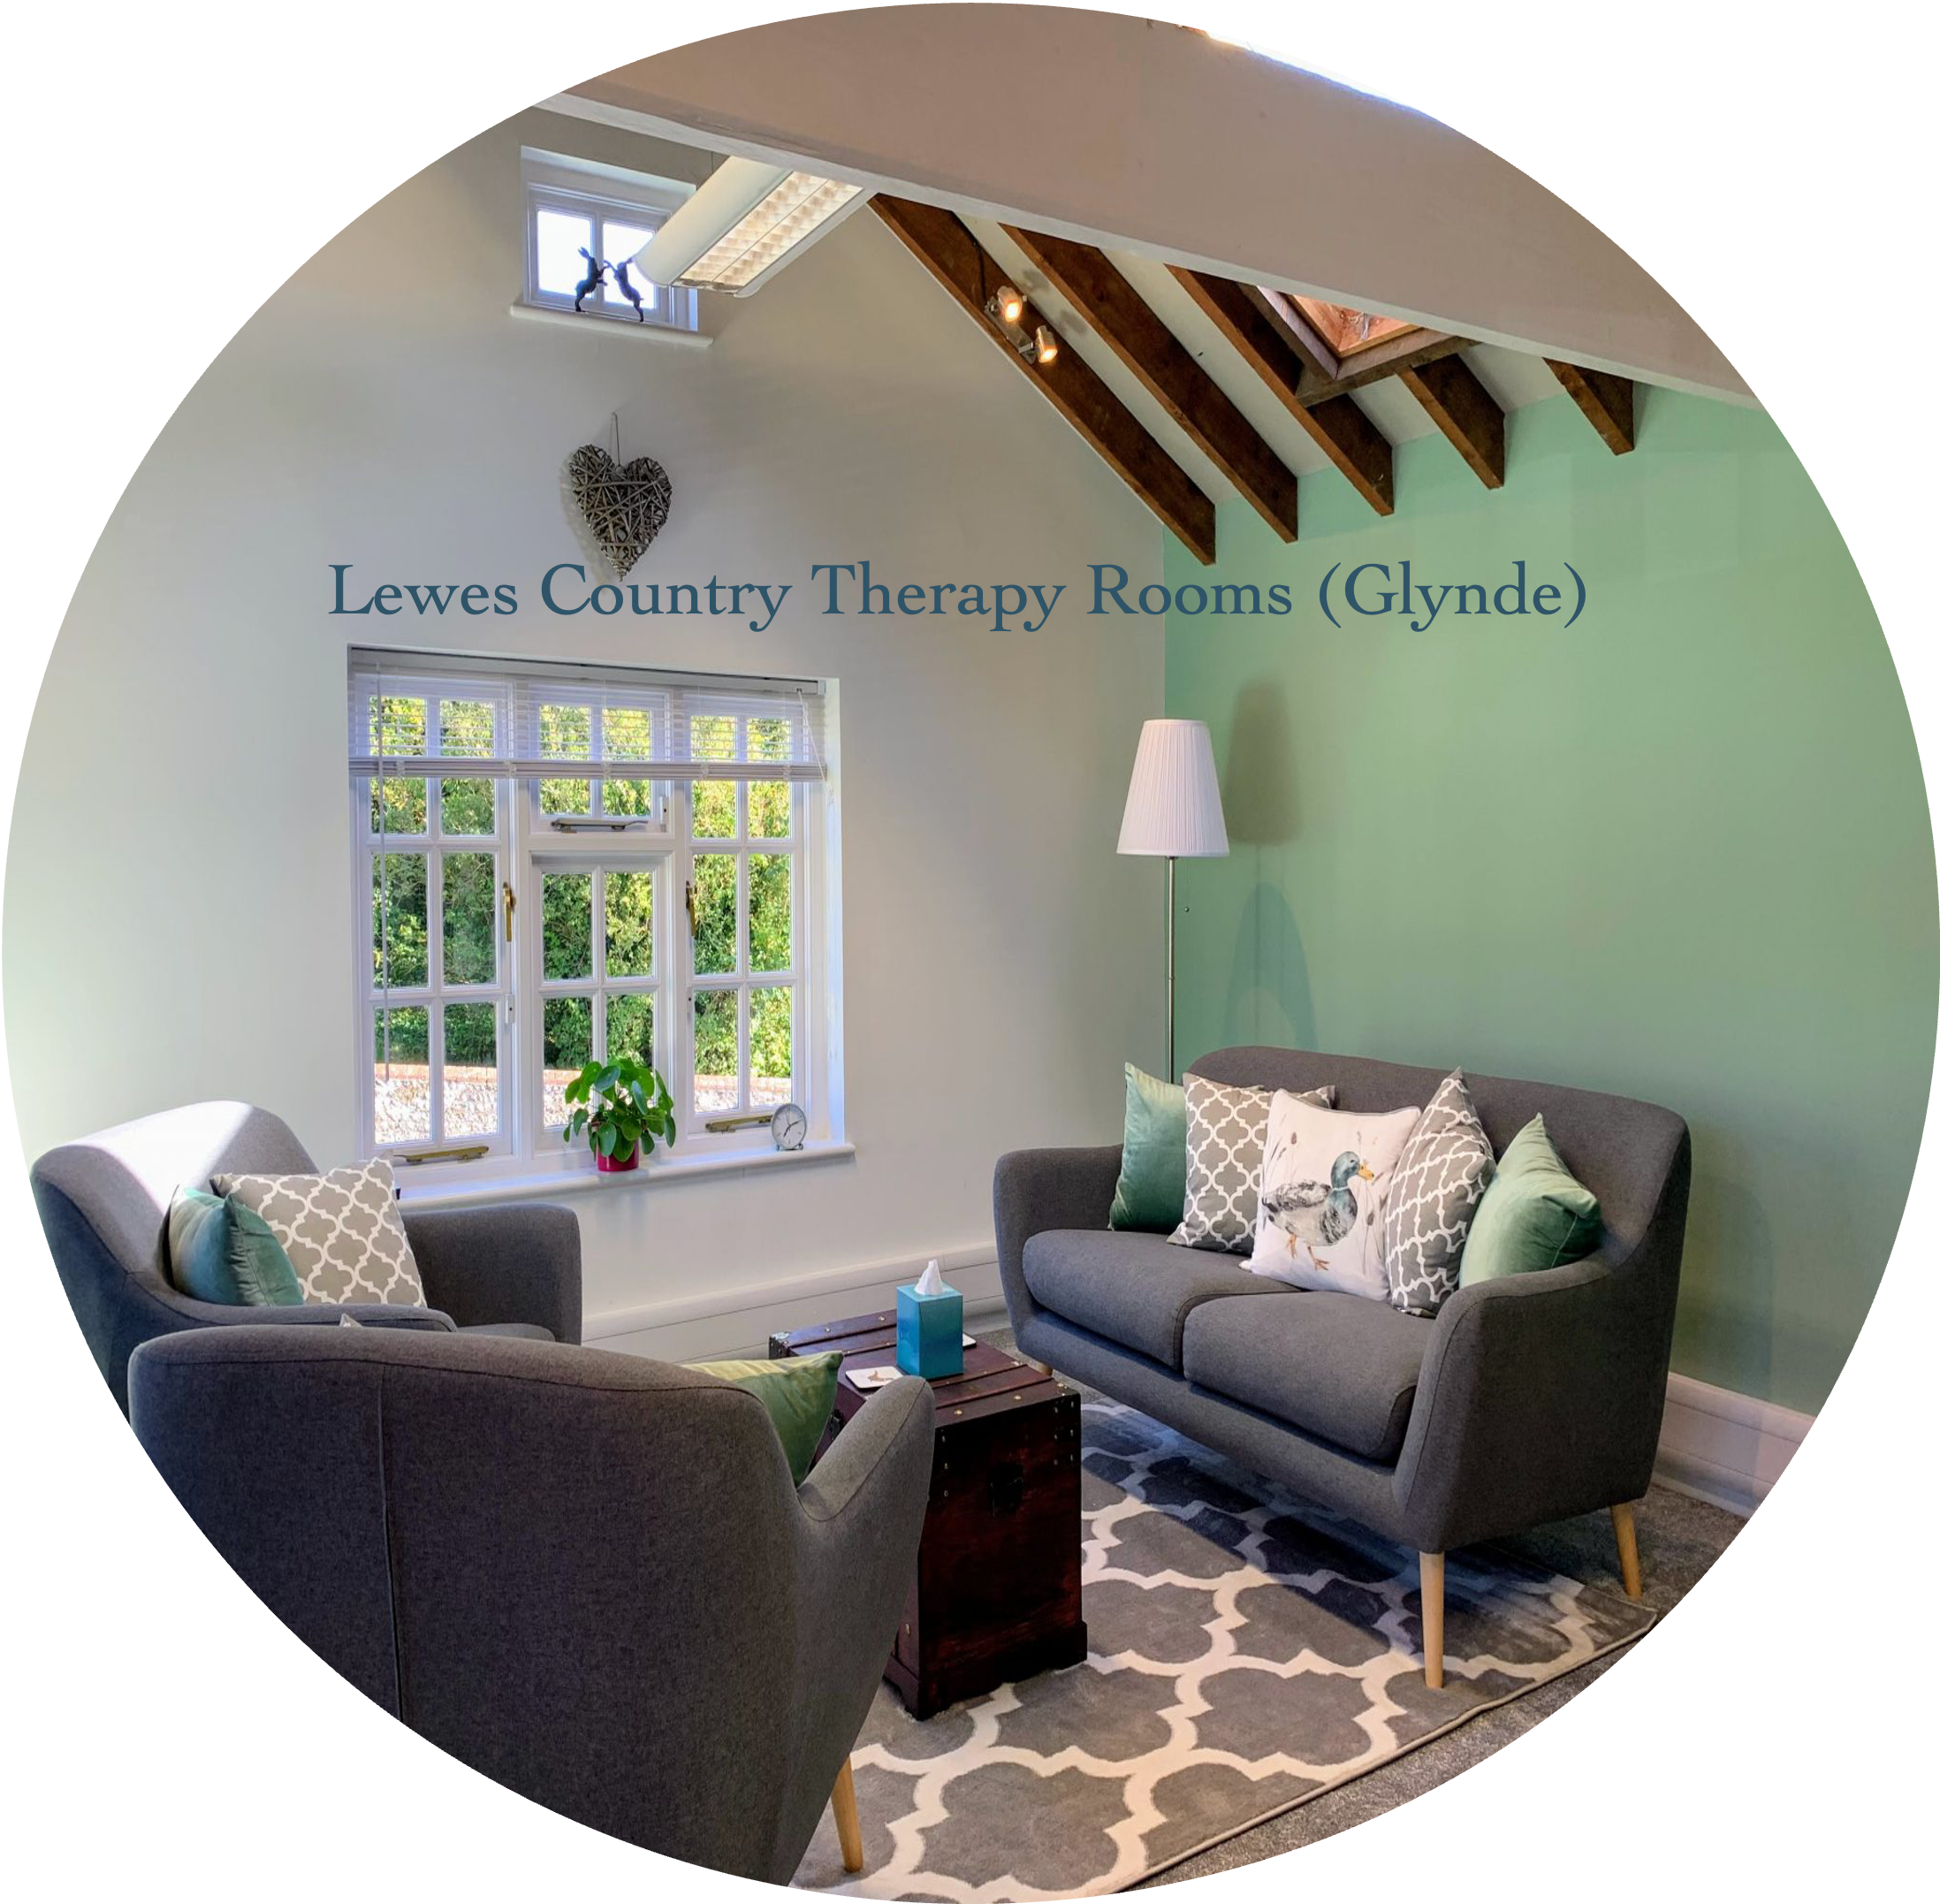 Lewes County Therapy Rooms